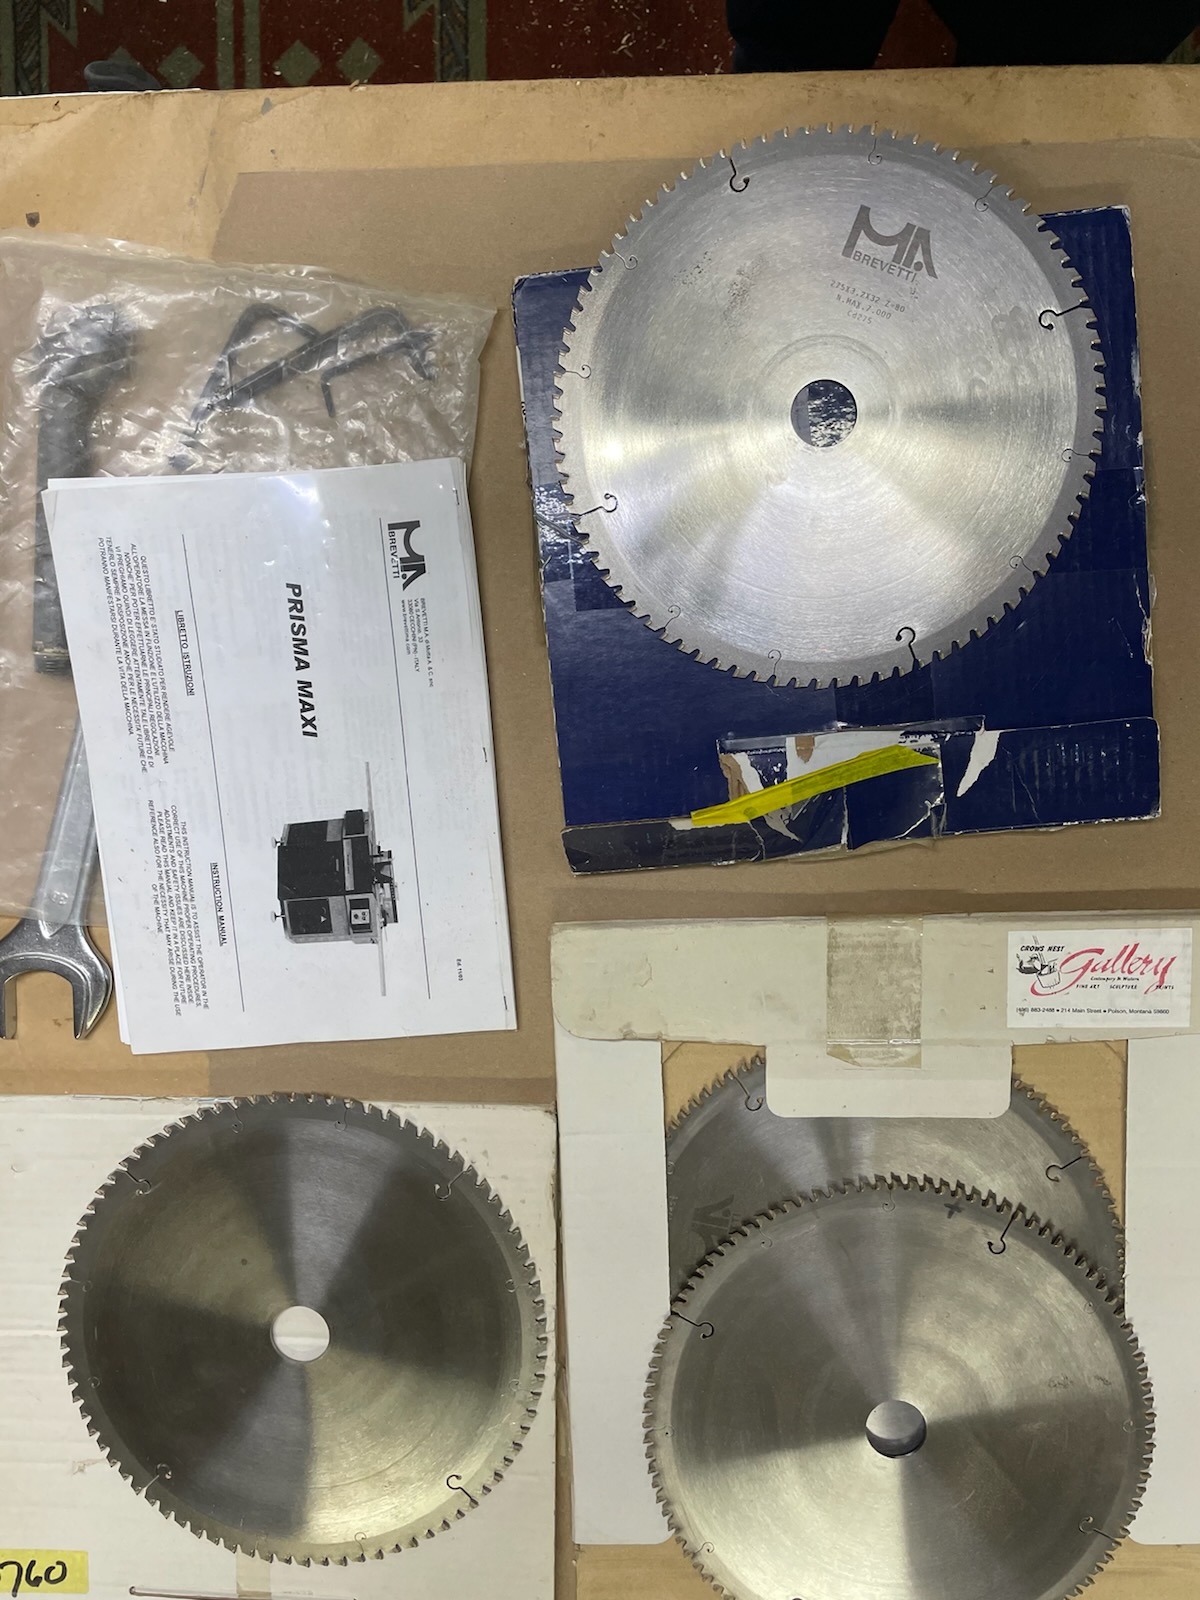 Picture Framing Equipment Lot: Brevetti Double Mitre Saw, C&H Mat Cutter, Fletcher Cutter & Supplies (Used) Item # UE-071822A (Montana)